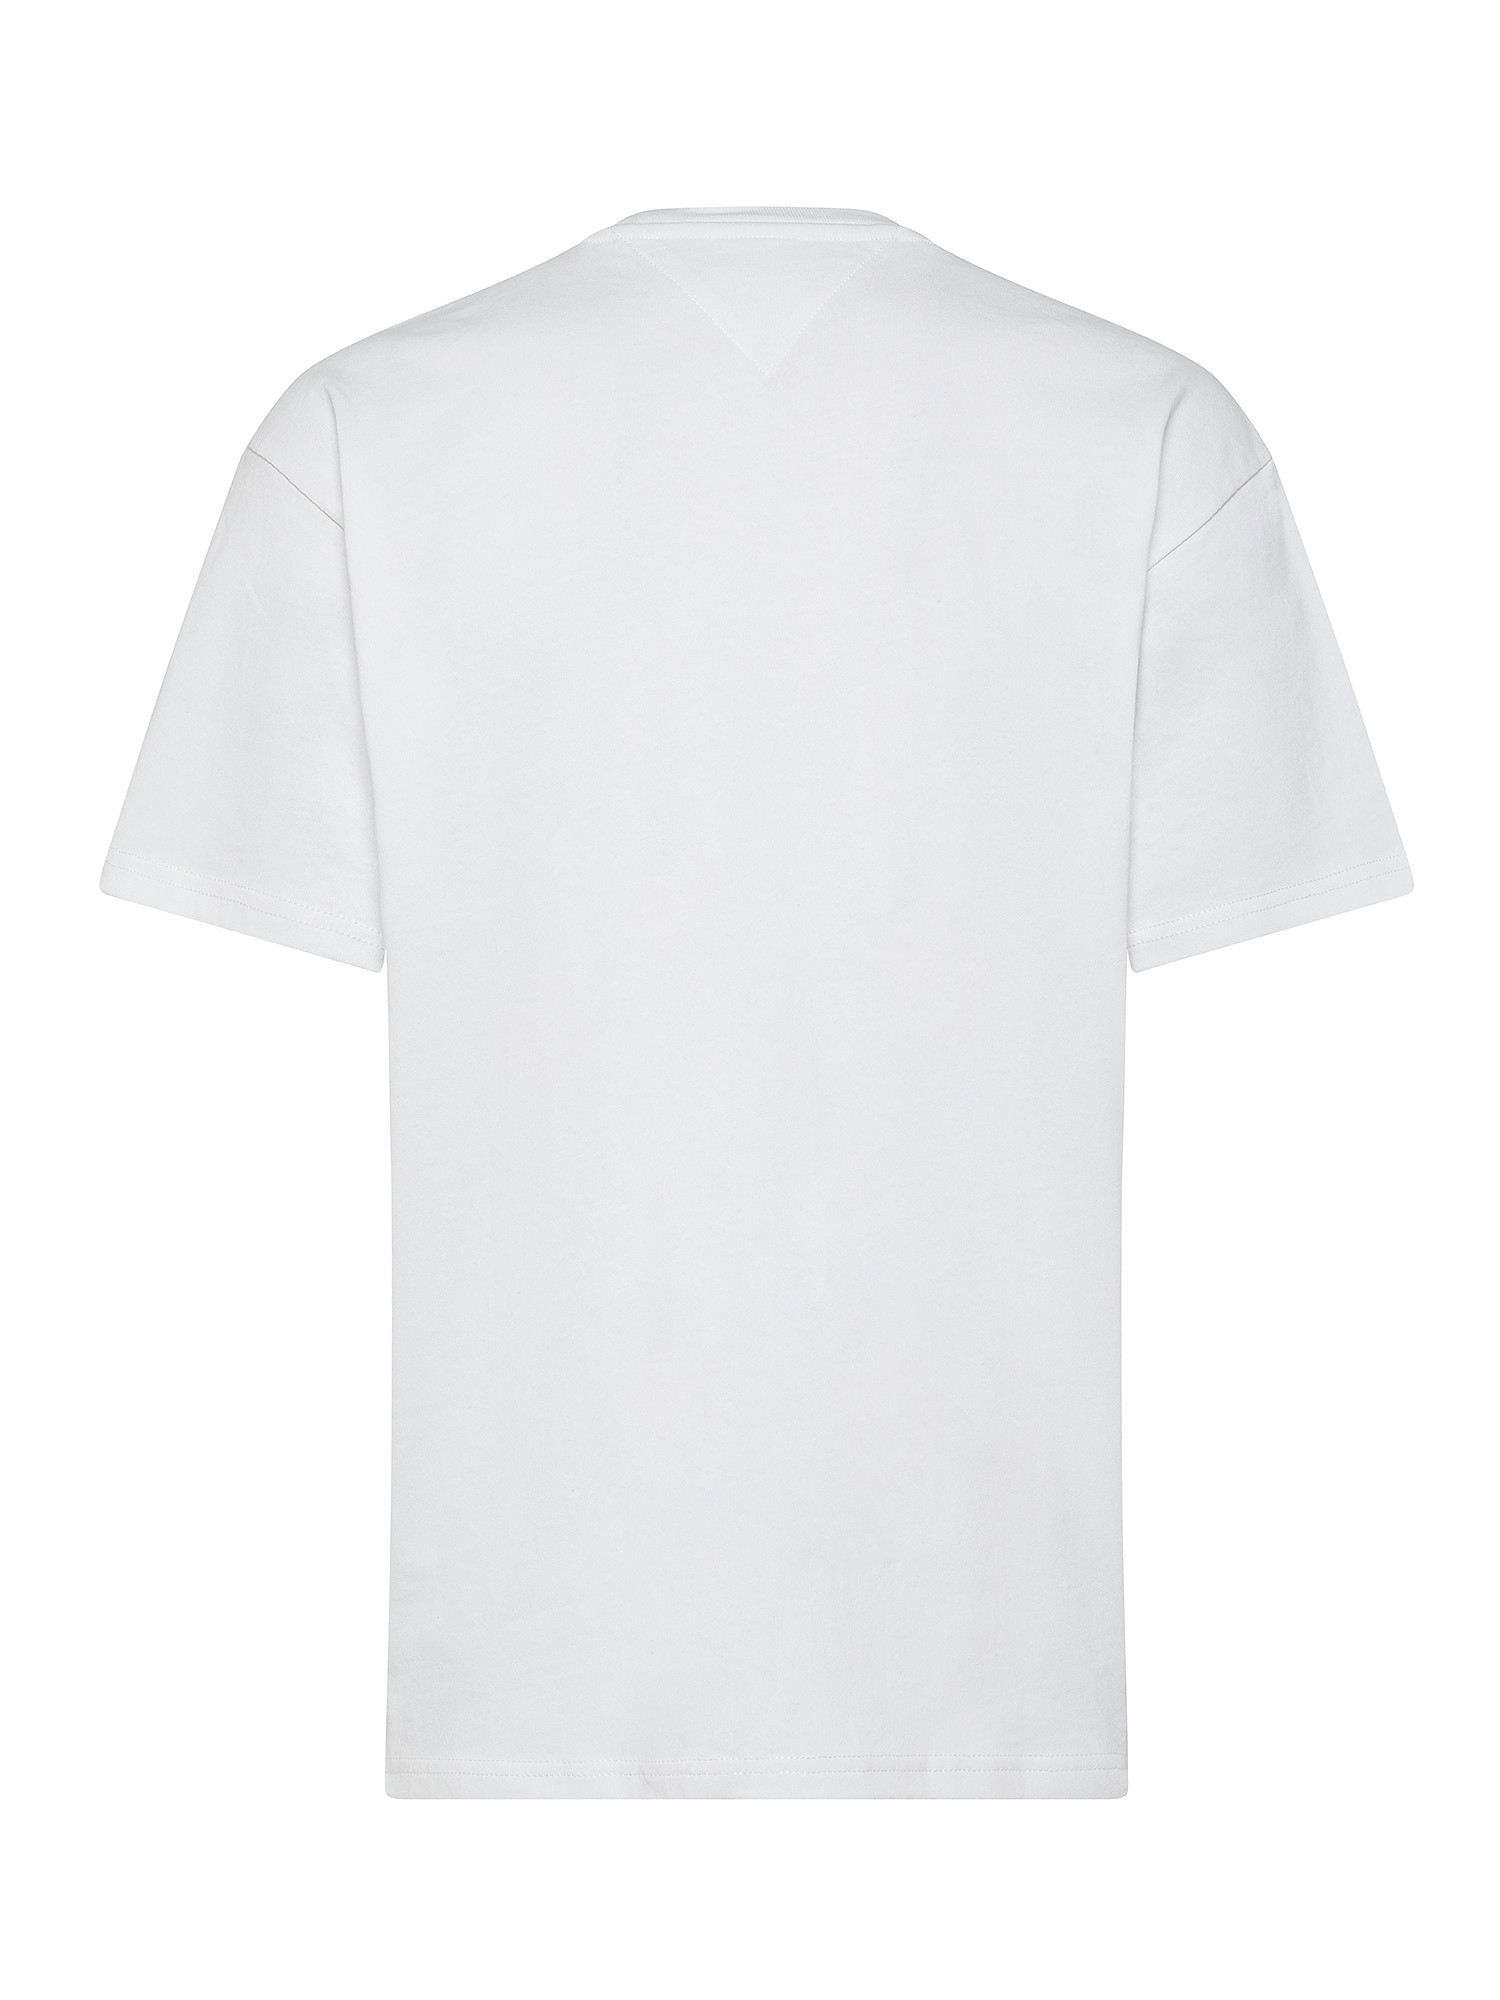 Tommy Jeans - T-shirt girocollo in cotone con stampa e logo, Bianco, large image number 1